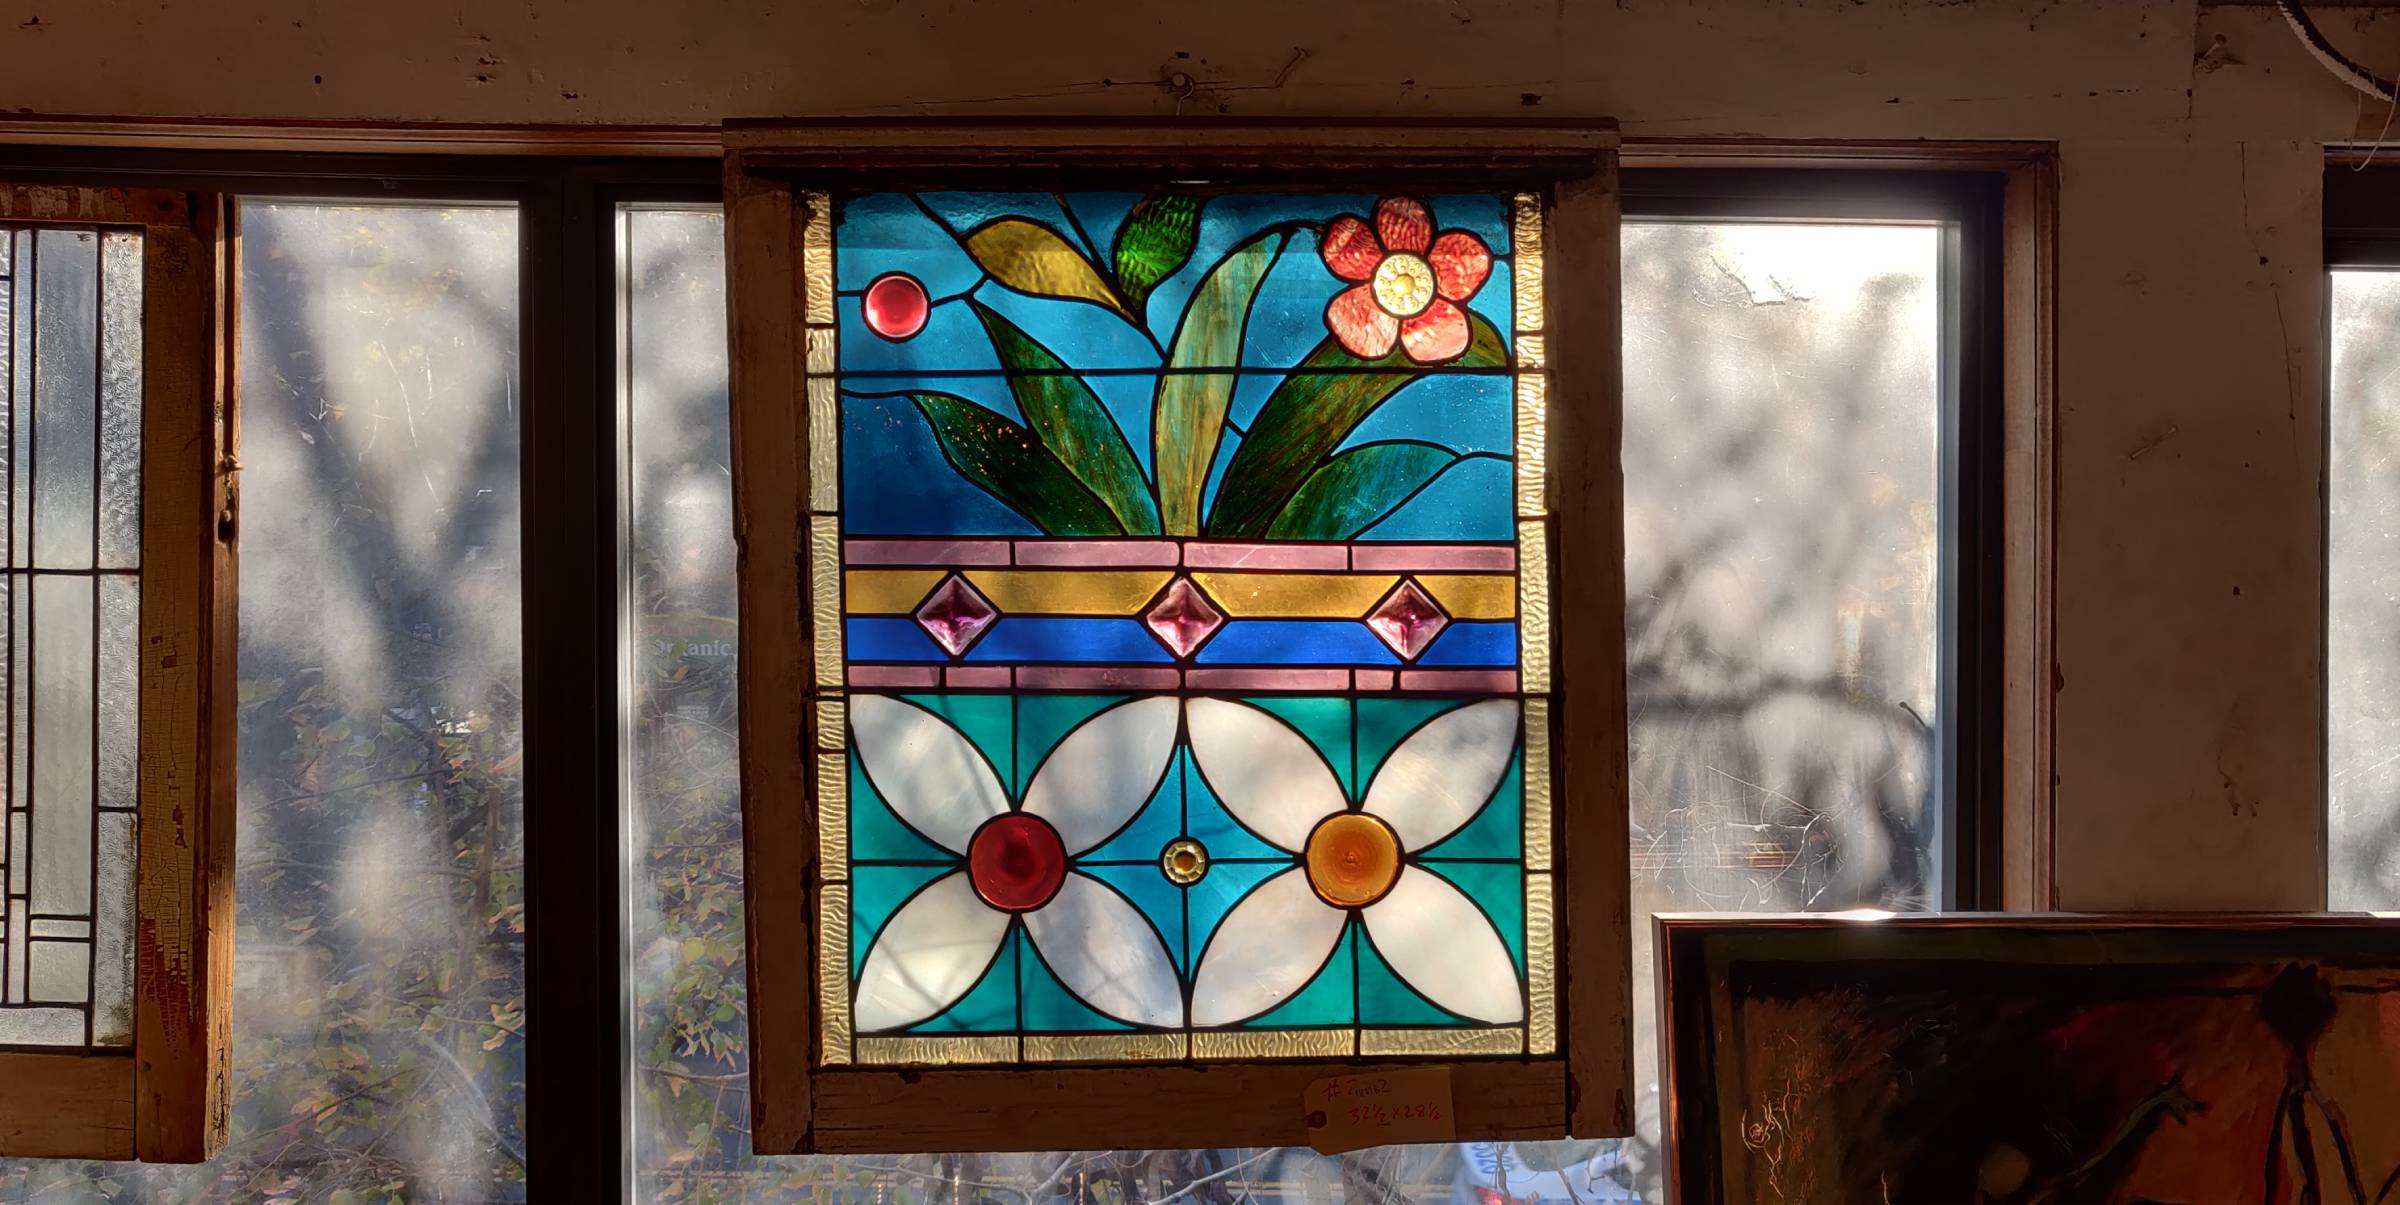 Winter sunlight shines through a stained glass panel in an antique shop. The top half of the panel shows live flowers, the bottom a geometric flower motif.